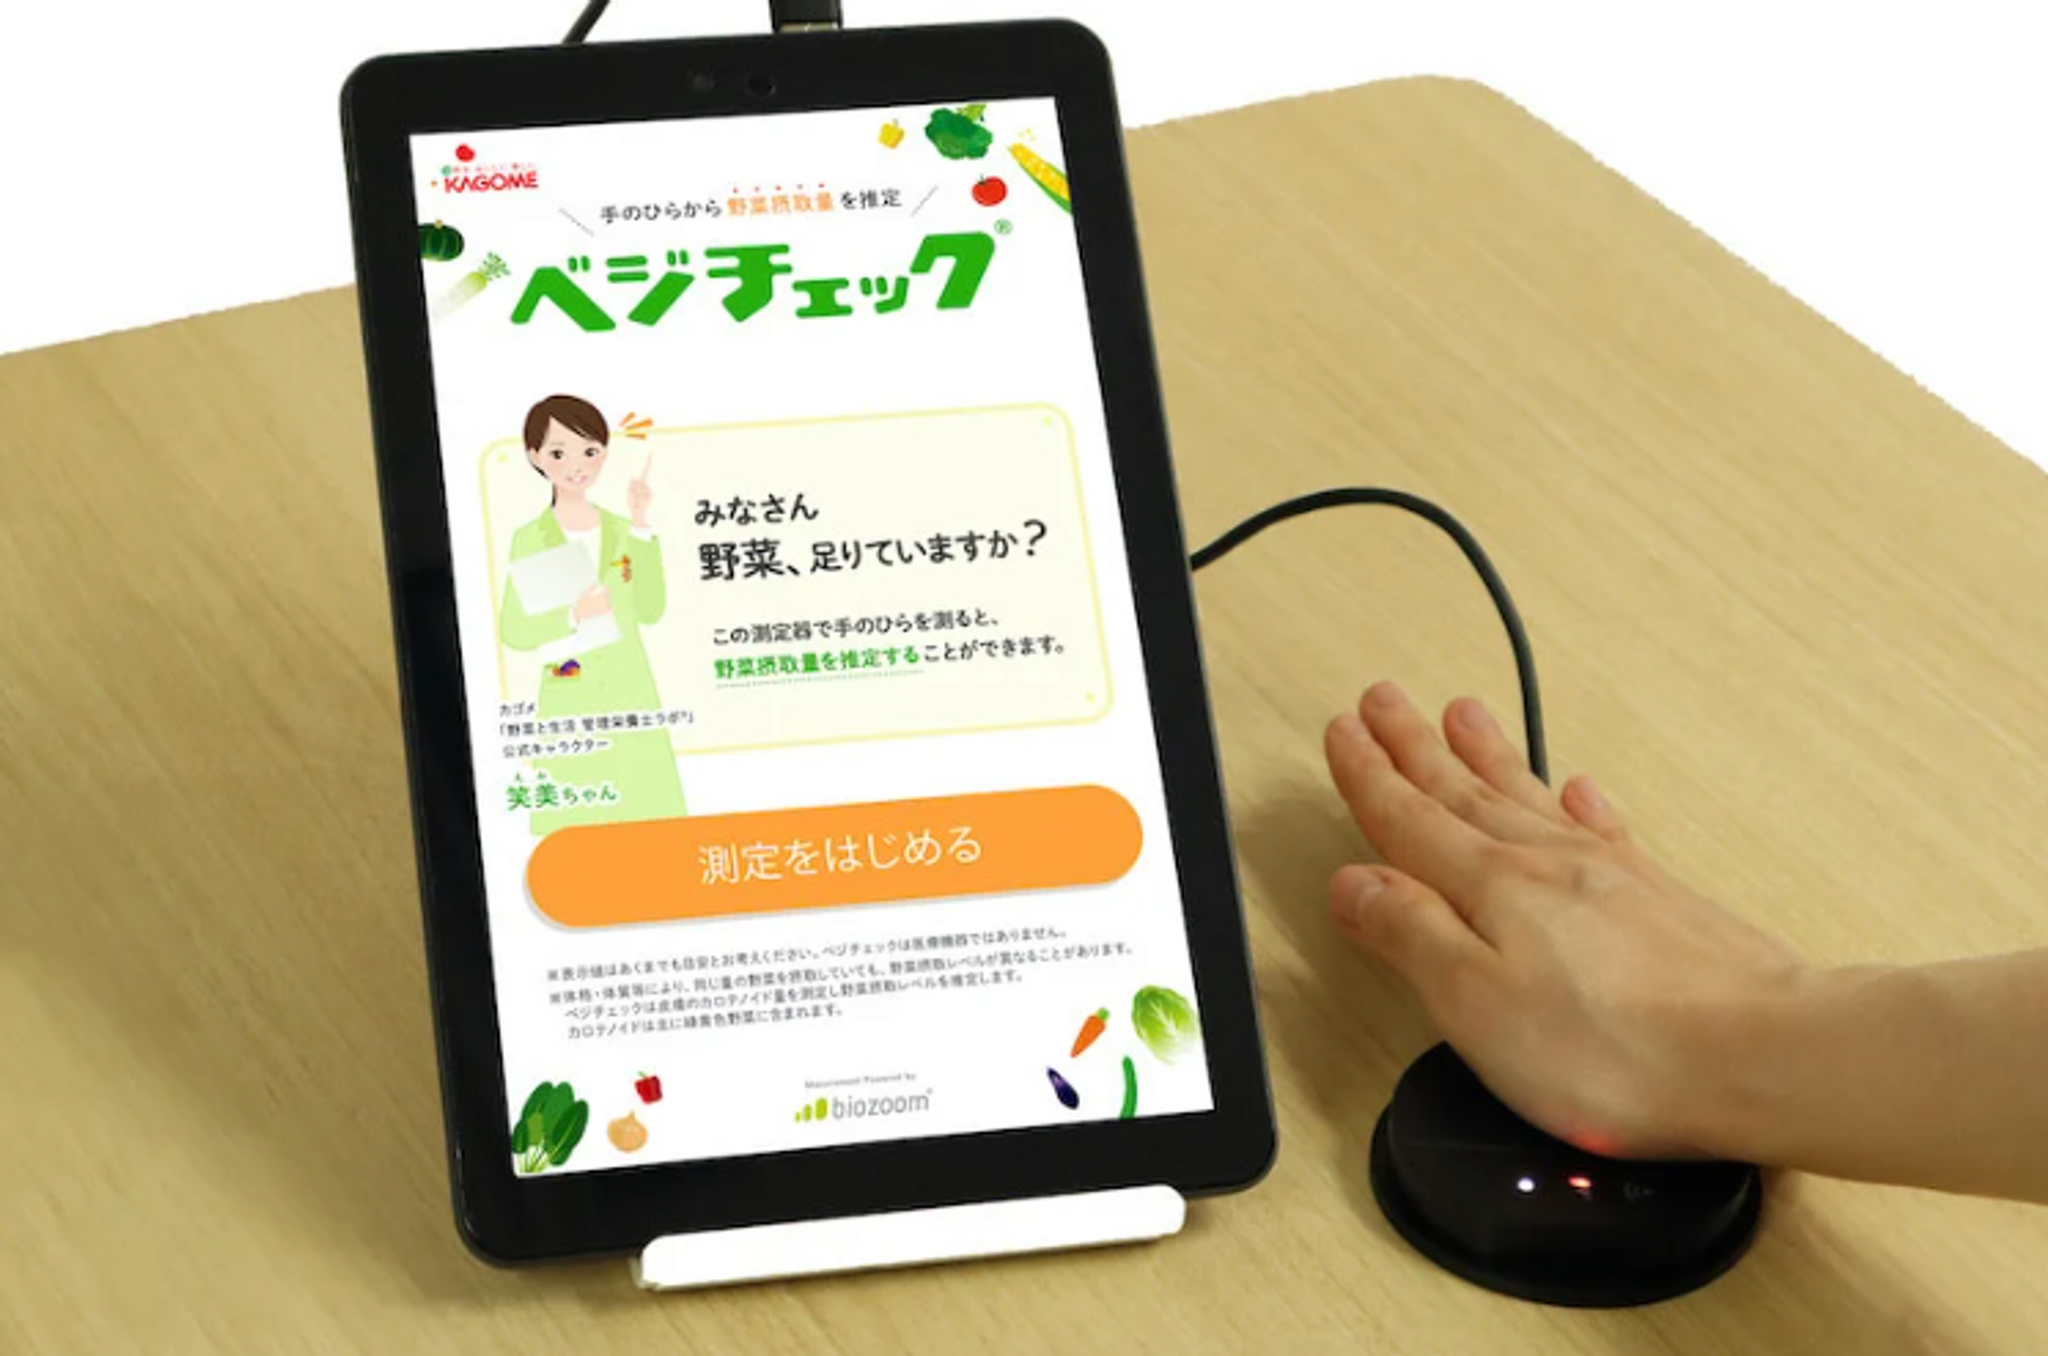 7-Eleven launches wellbeing Veggie-Checks in Japan